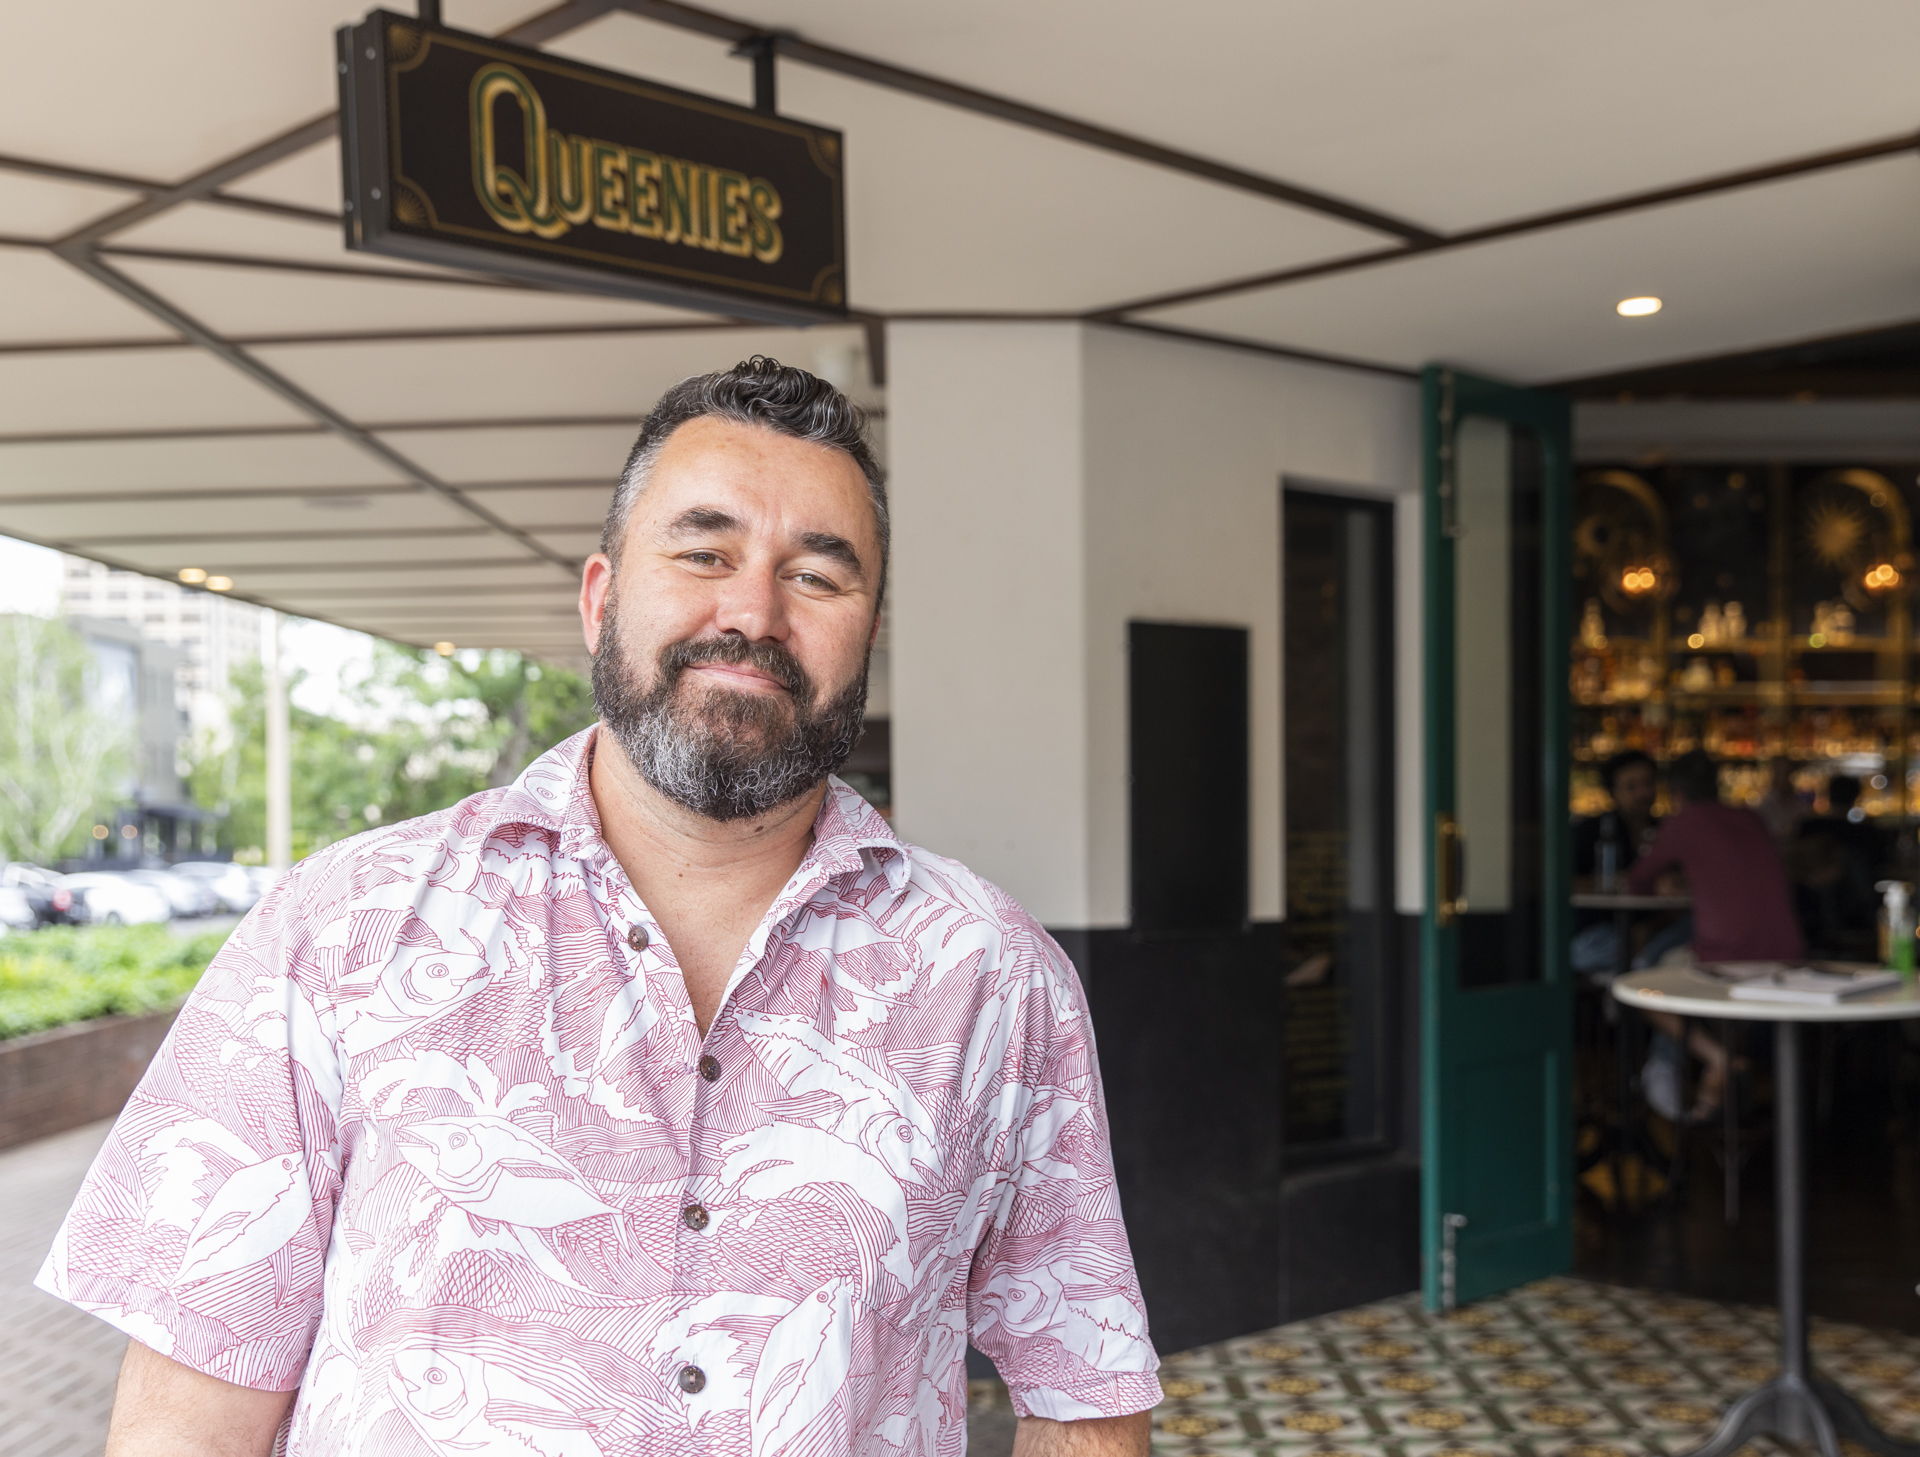 Five minutes with Ben Johnston, The Old Canberra Inn and Queenies